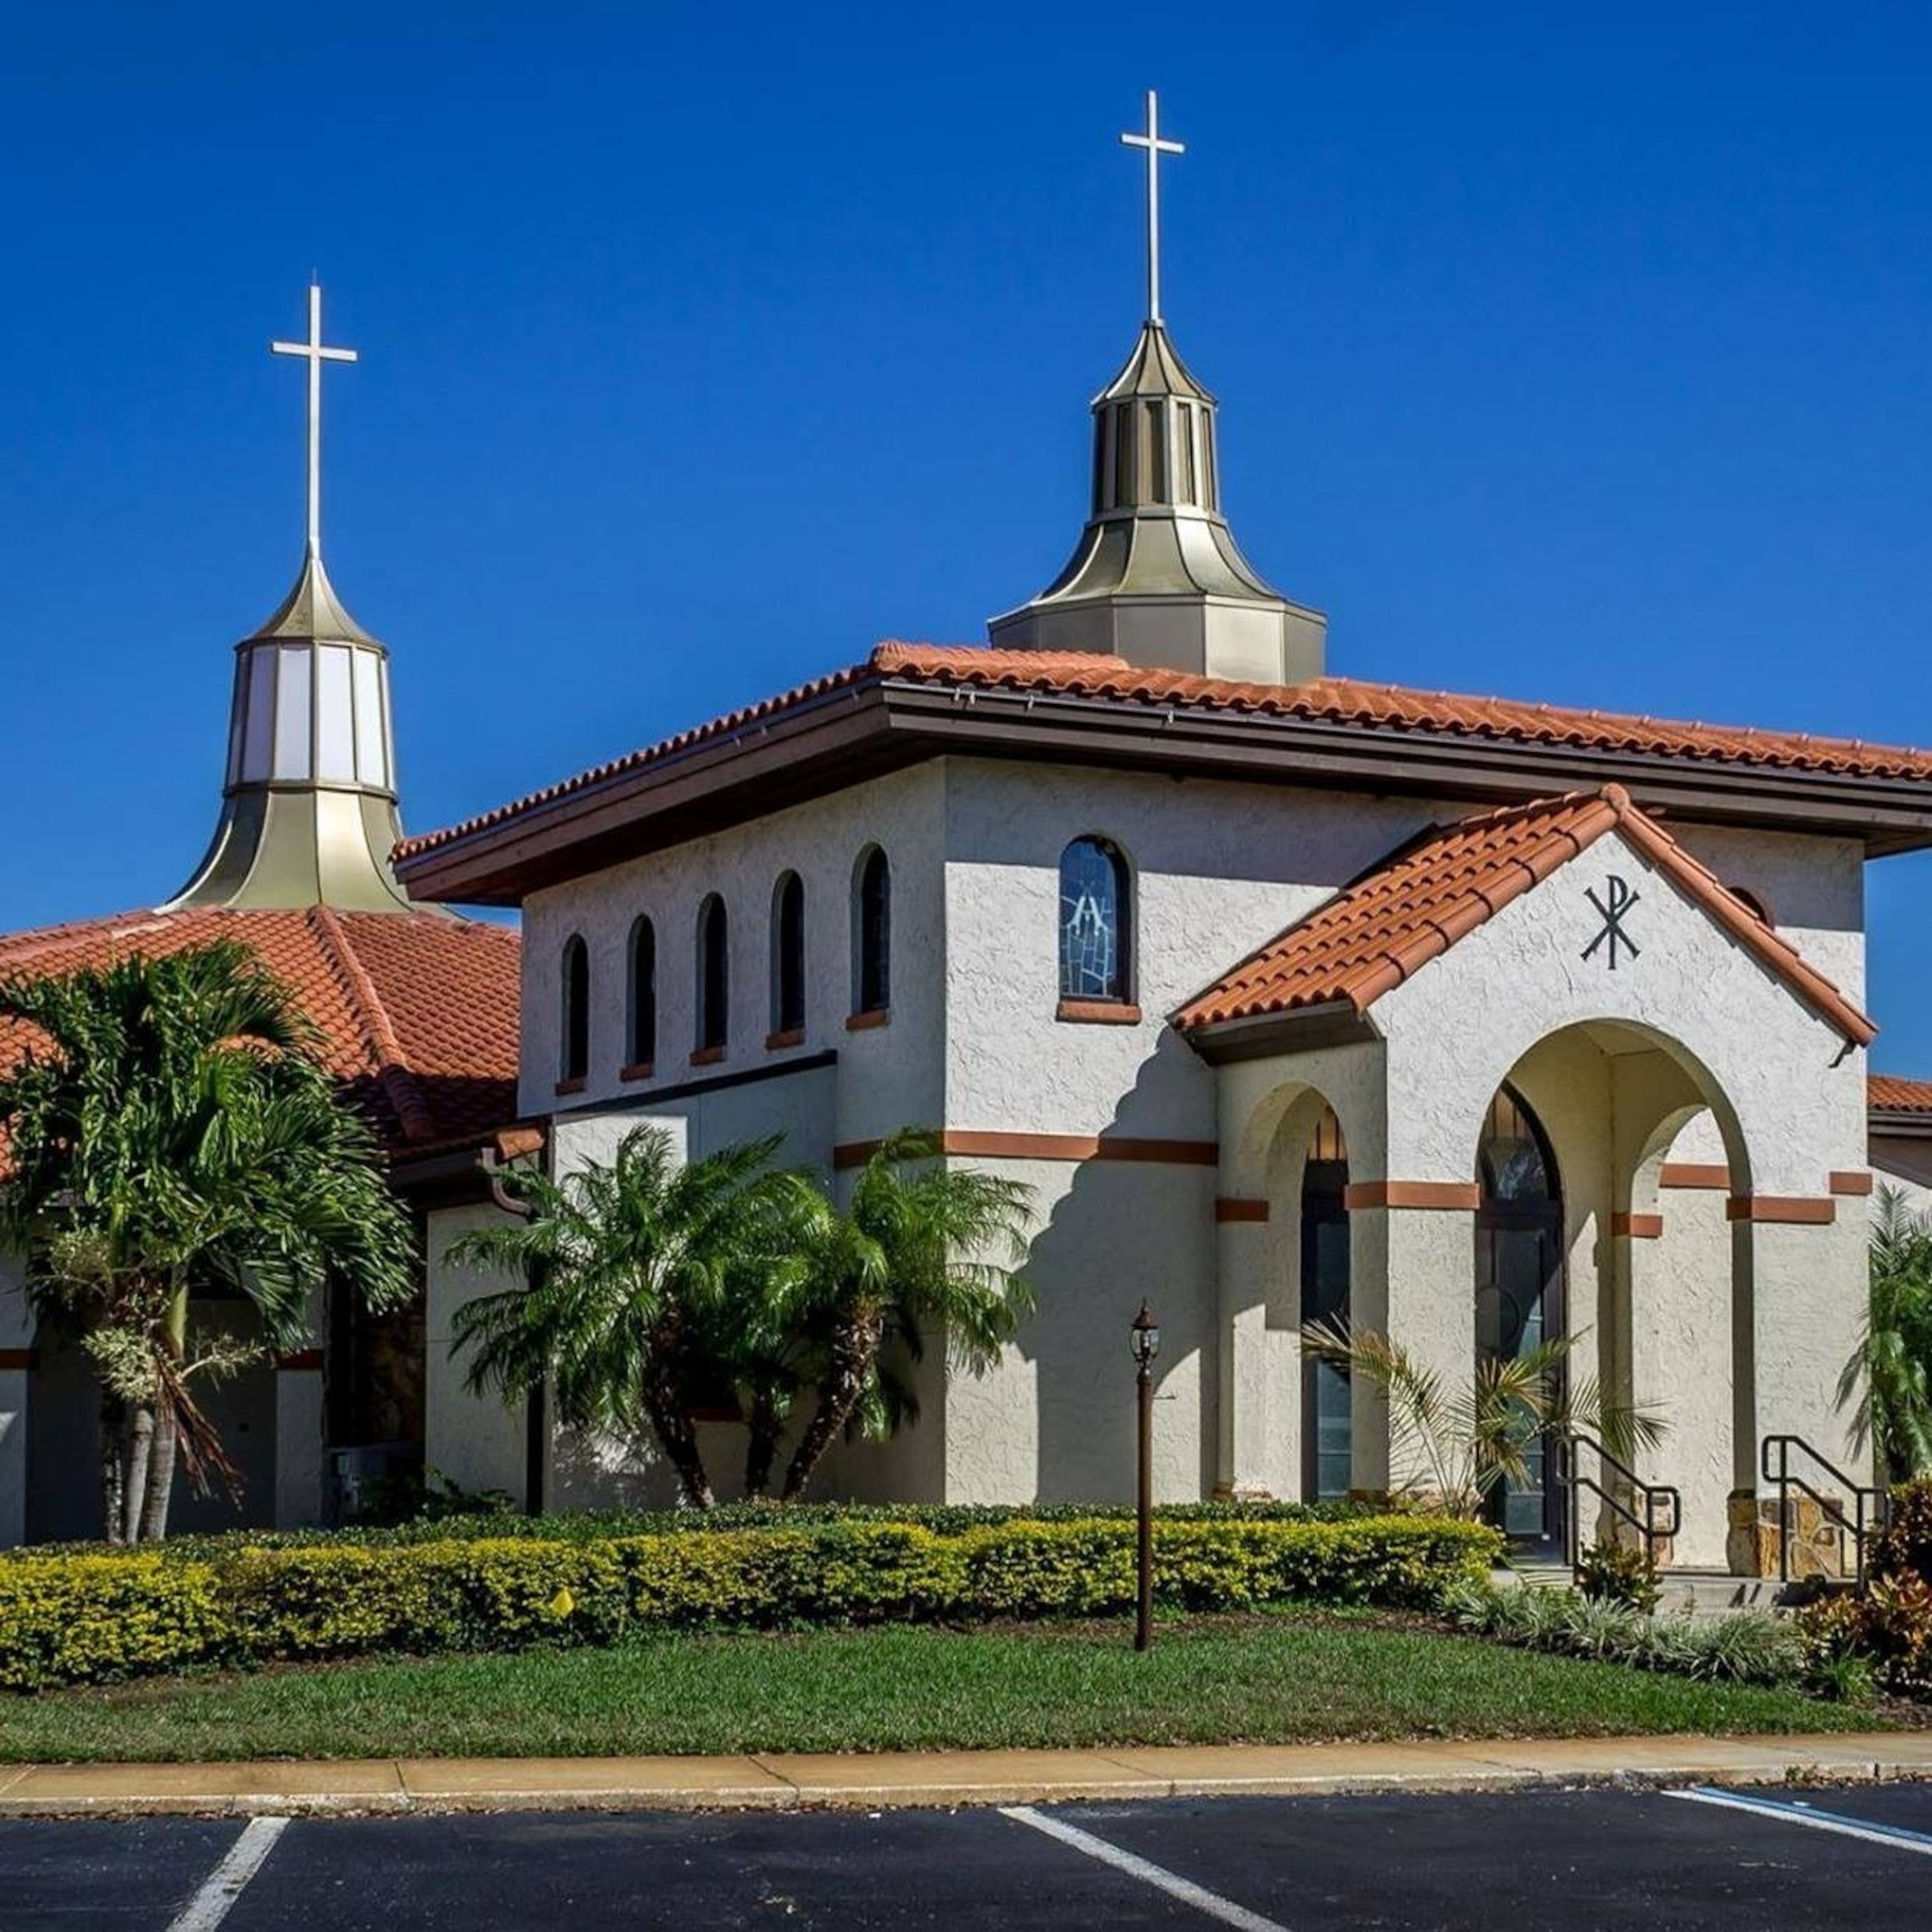 PHOTO: A priest in Florida bit a woman’s hand during a physical altercation while he was administering Communion to the congregants of his church, officials said.